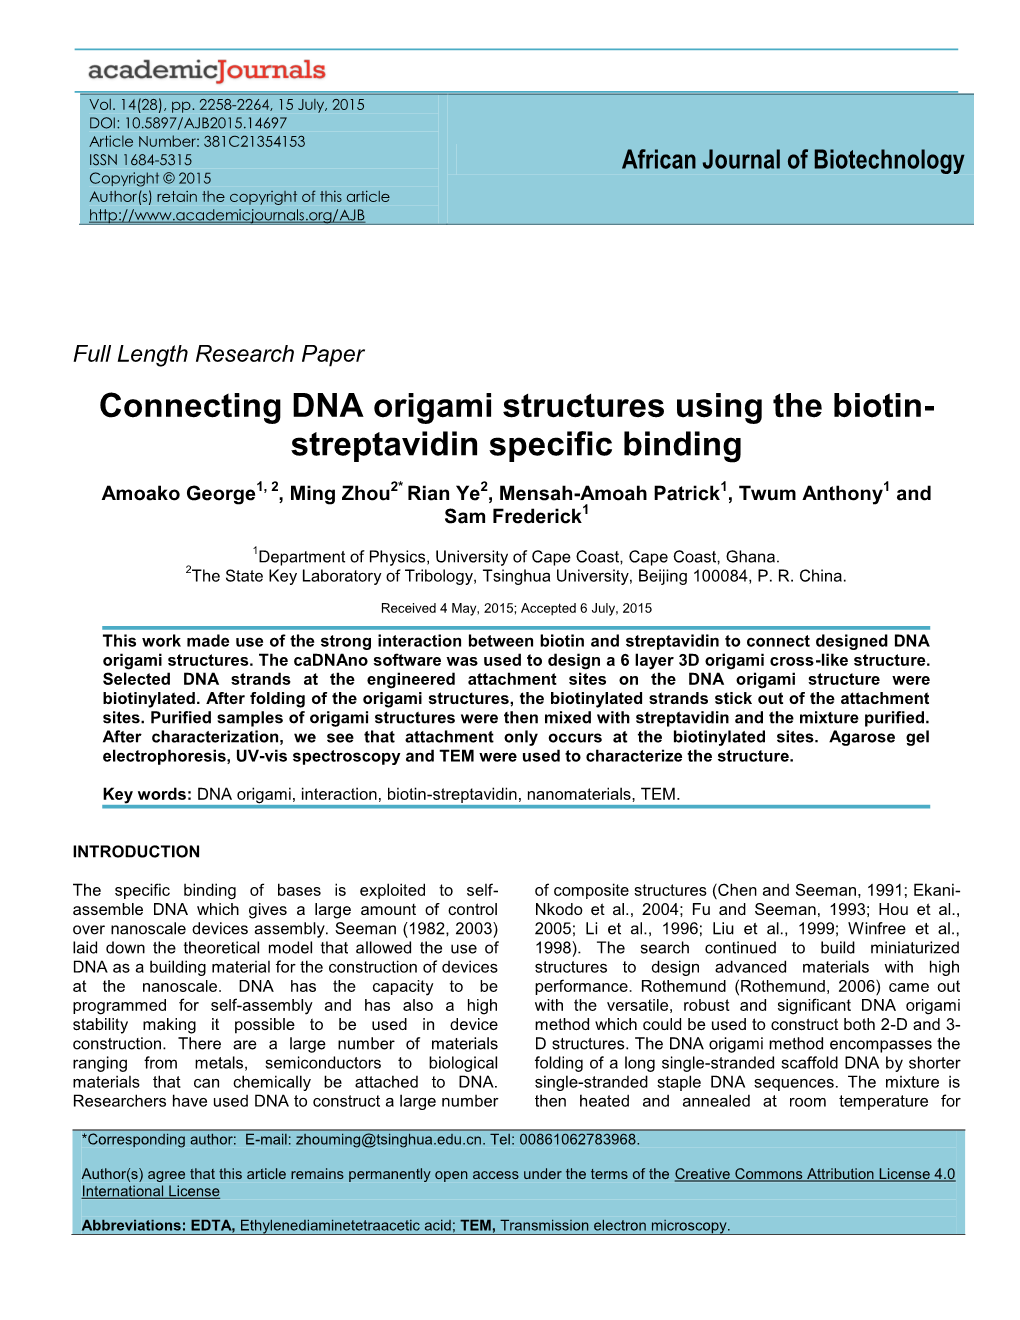 Connecting DNA Origami Structures Using the Biotin- Streptavidin Specific Binding